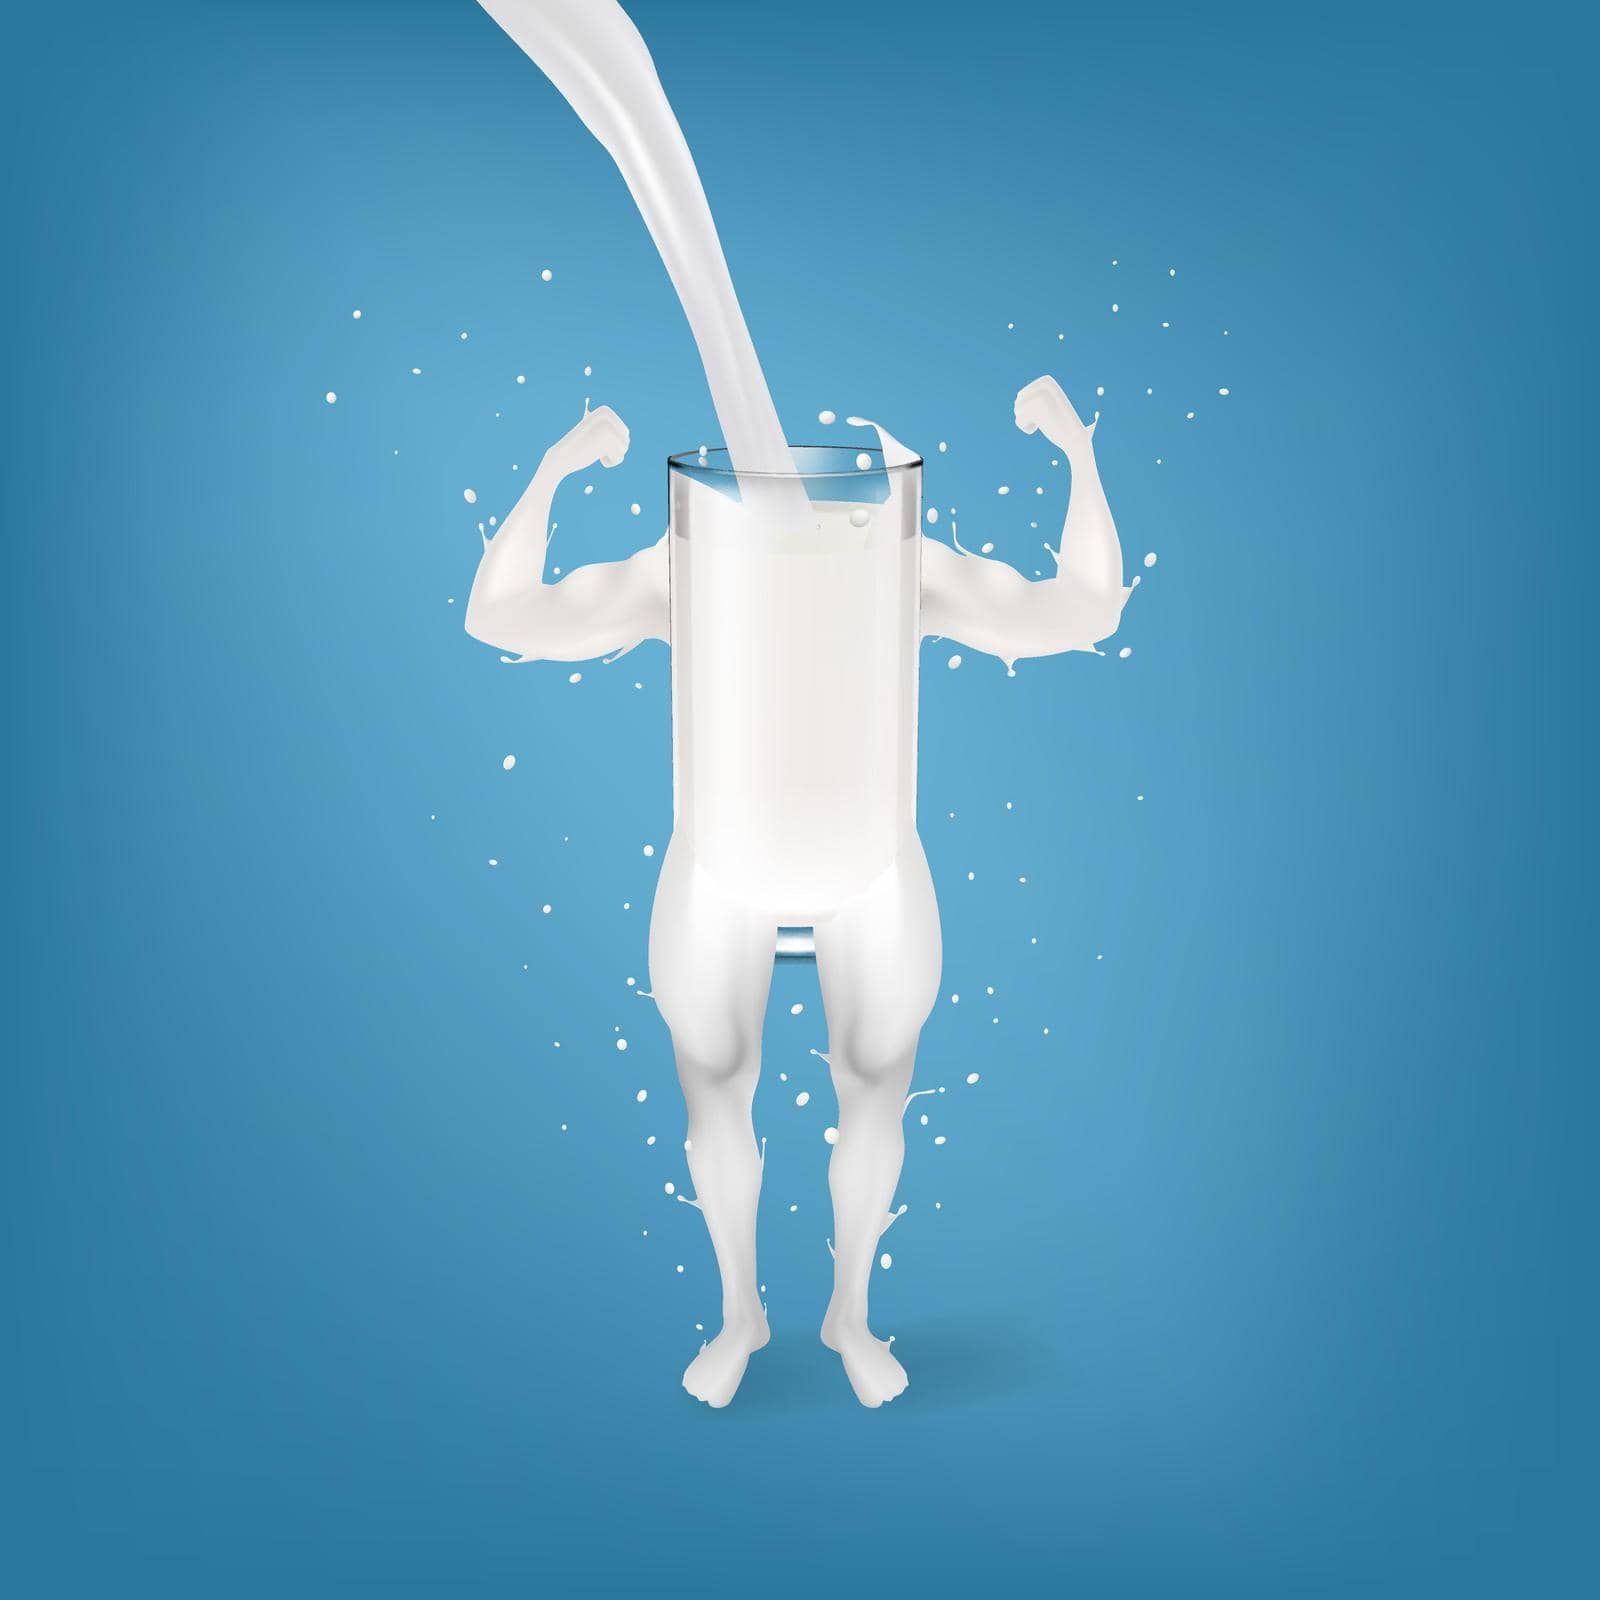 Splash Of Milk In Form Of Strong Arms And Legs Concept. EPS10 Vector